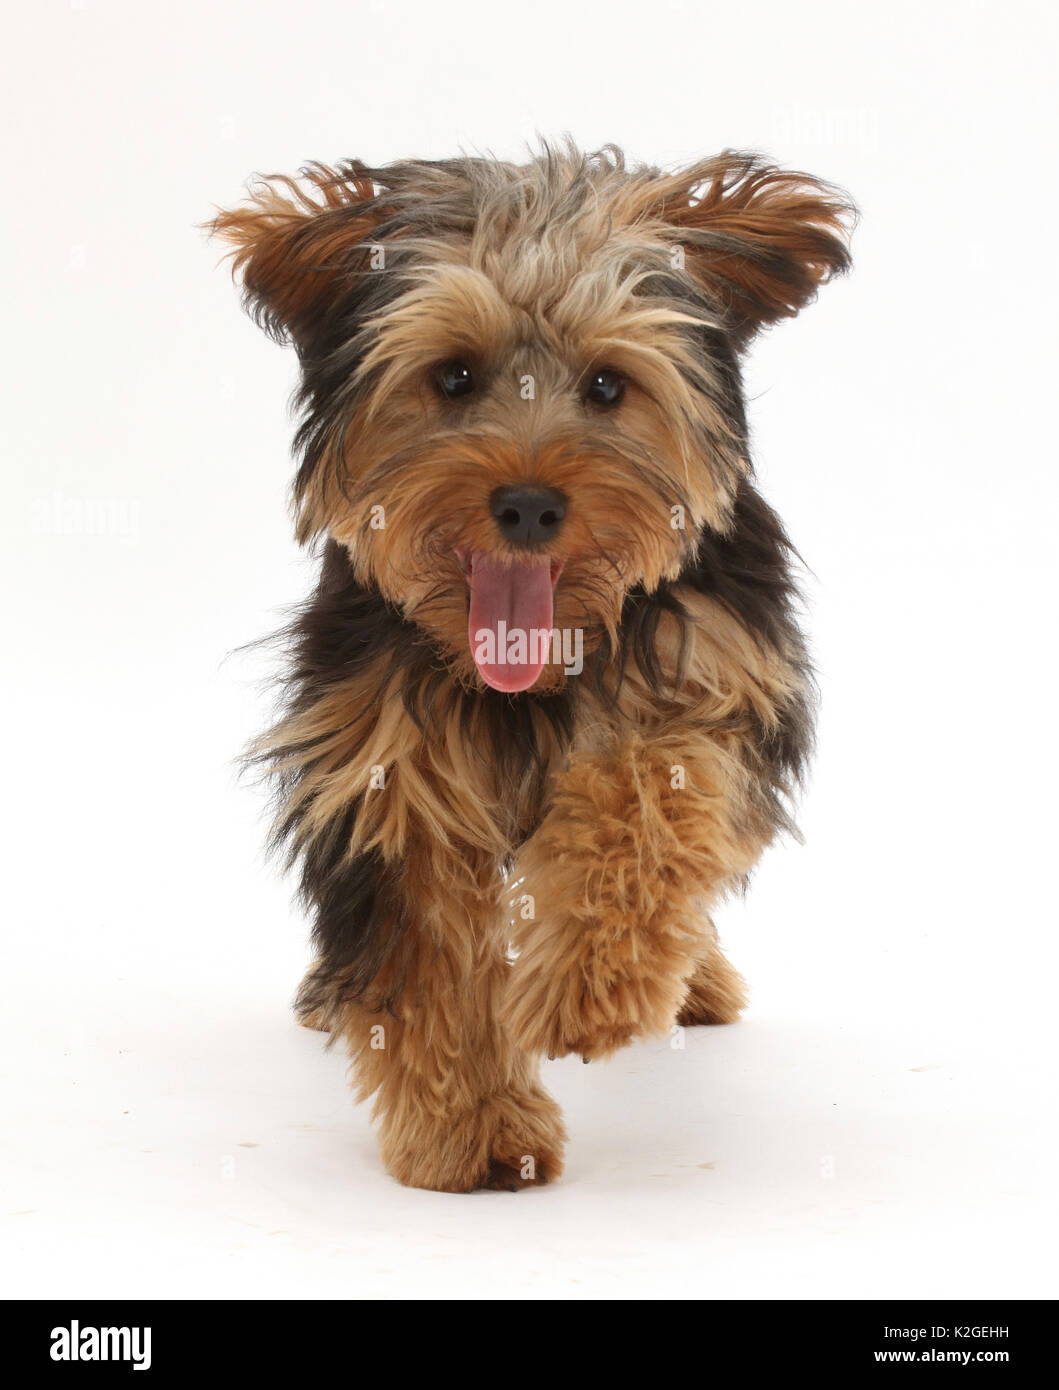 Yorkipoo dog, Yorkshire terrier cross Poodle, Oscar, age 6 months, running. Stock Photo